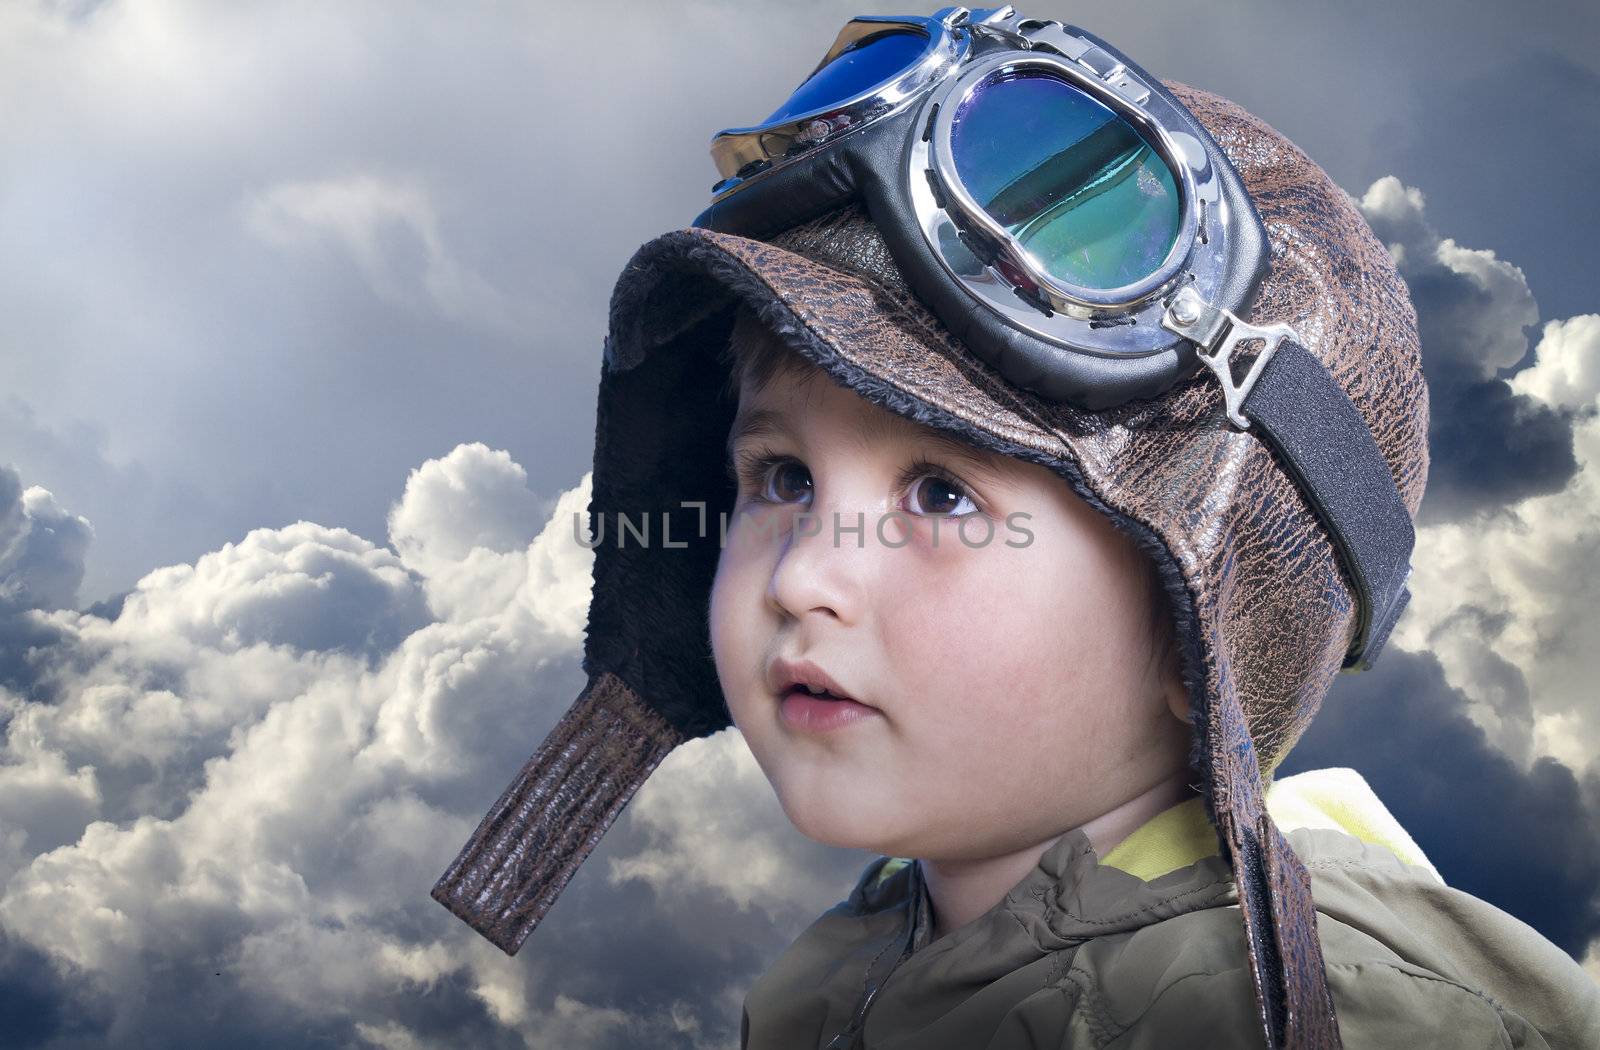 A little cute baby dreams of becoming a pilot. Pilot outfit, hat and glasses